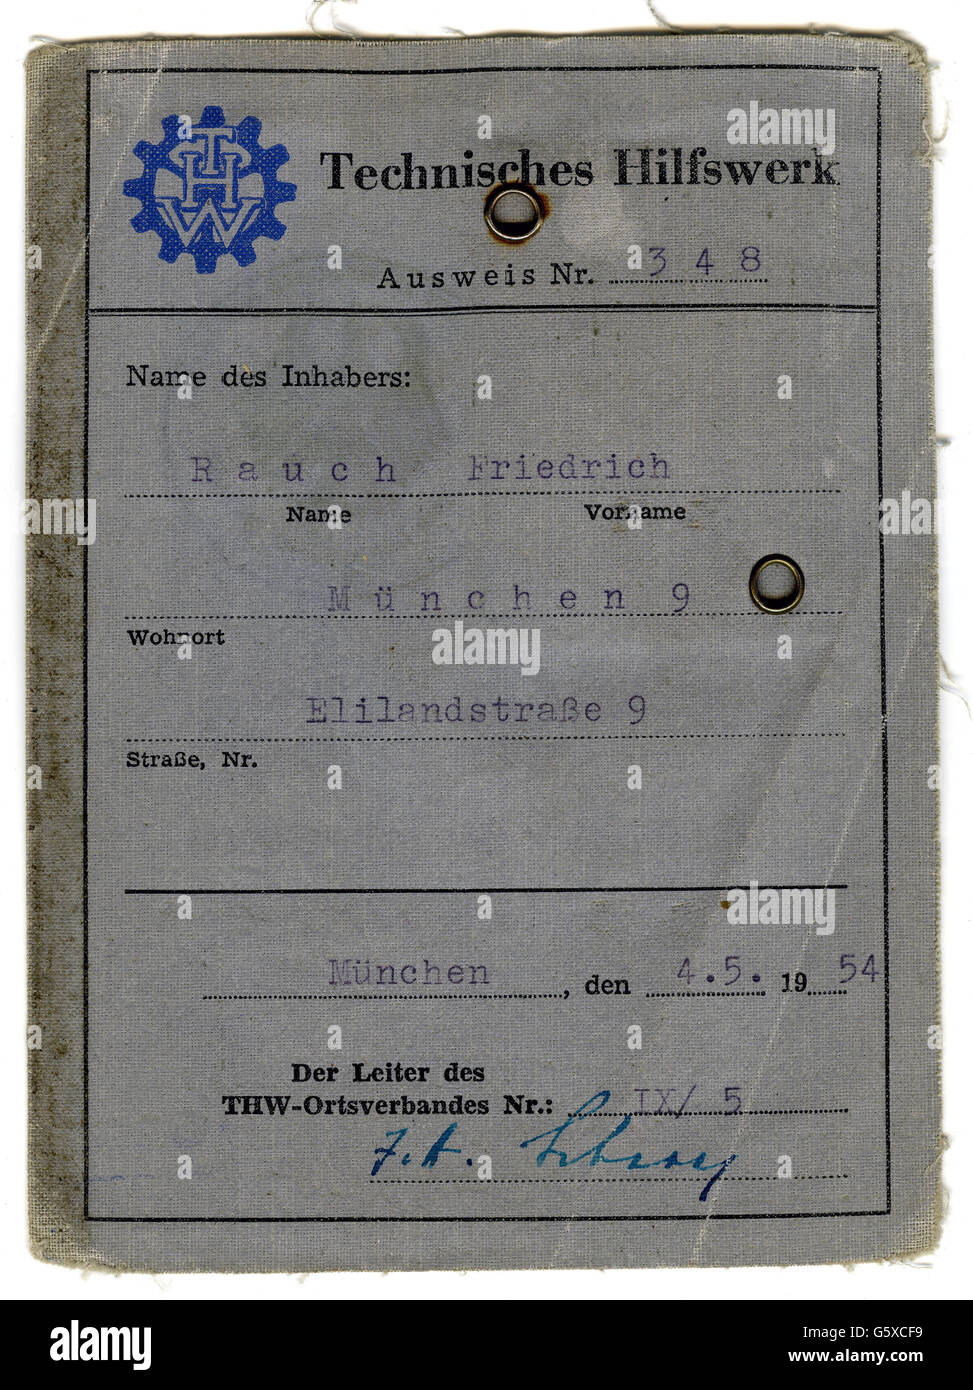 documents, membership card, Federal Agency for Technical Relief (Technisches Hilfswerk), Friedrich Rauch, Munich, 4.5.1954, Additional-Rights-Clearences-Not Available Stock Photo